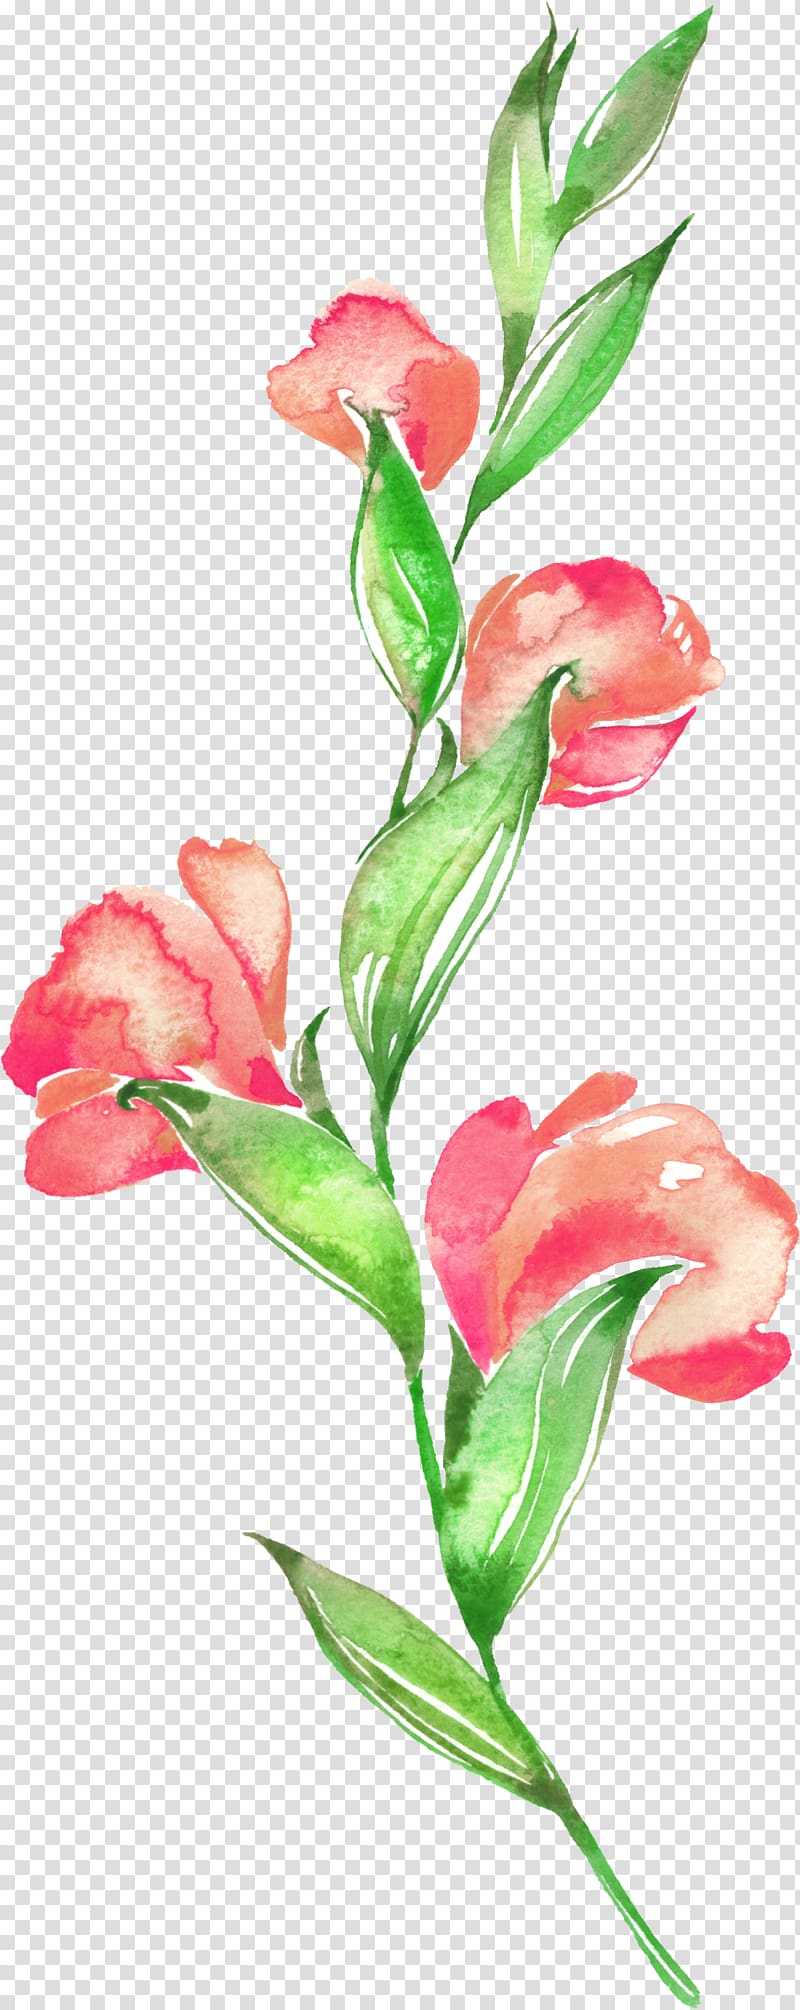 red gladiola flower , Floral design Flower Watercolor painting, Floral material floral background material transparent background PNG clipart